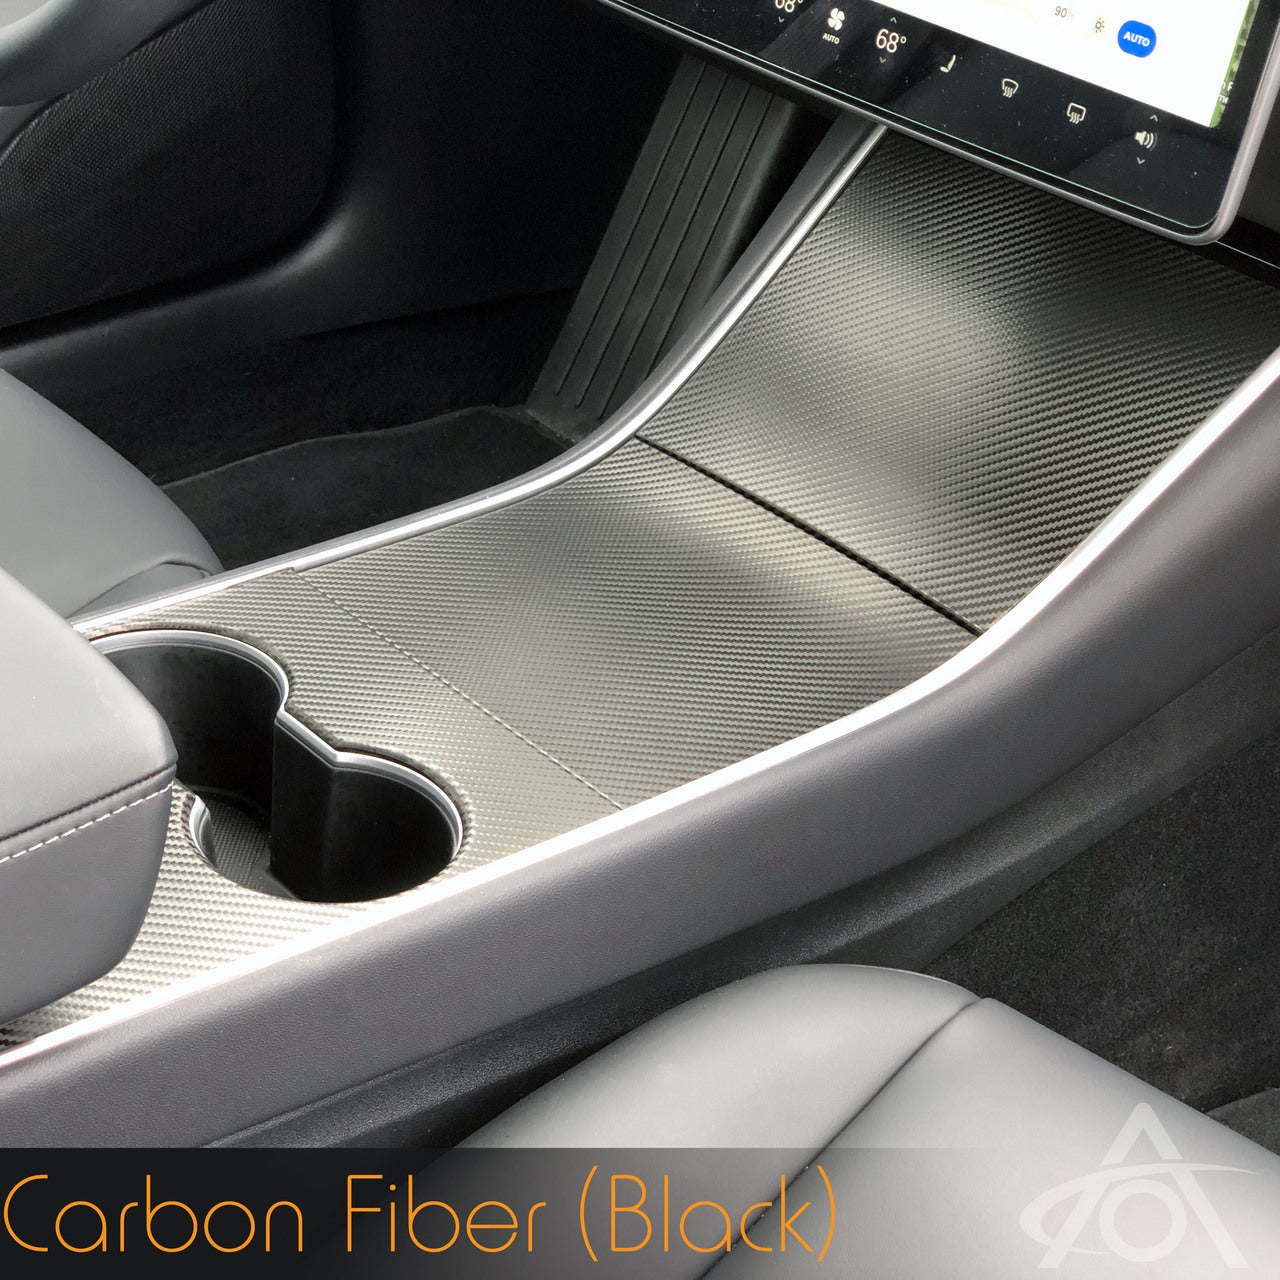 First look at Tesla's new center console in 2021 Model 3 refresh